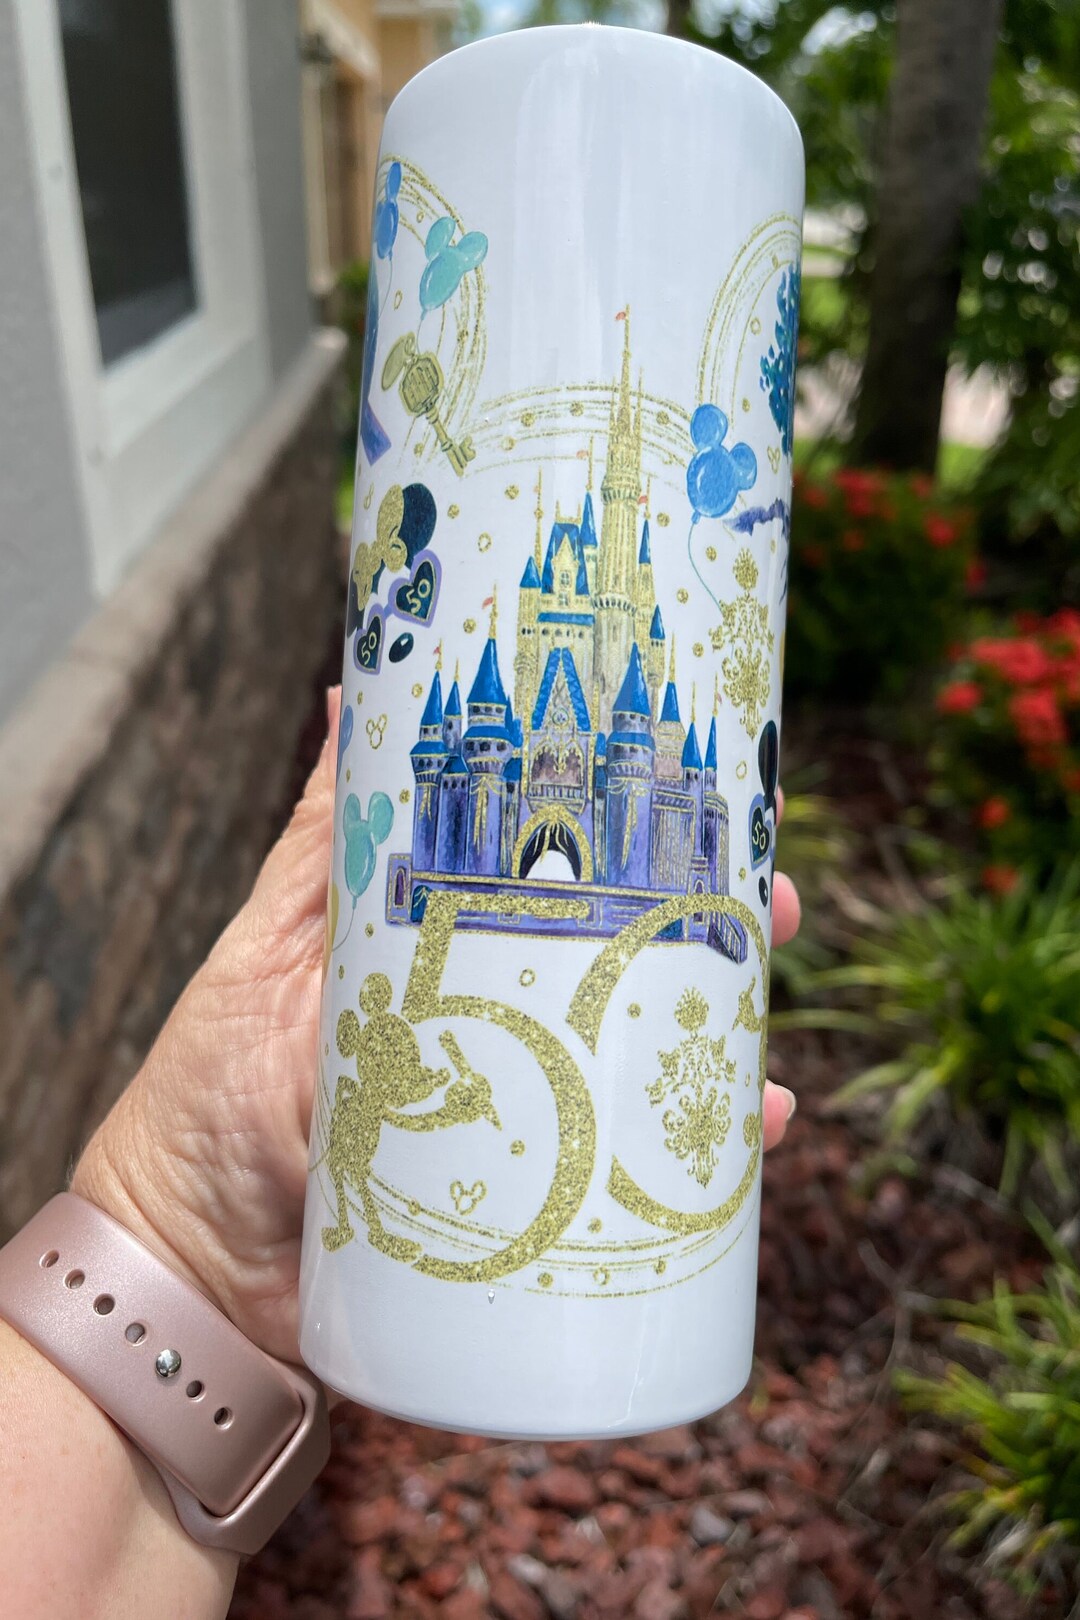 If You Can Dream It, Disney Life 456 Gift For Lover Day Travel Tumbler -  Teeruto